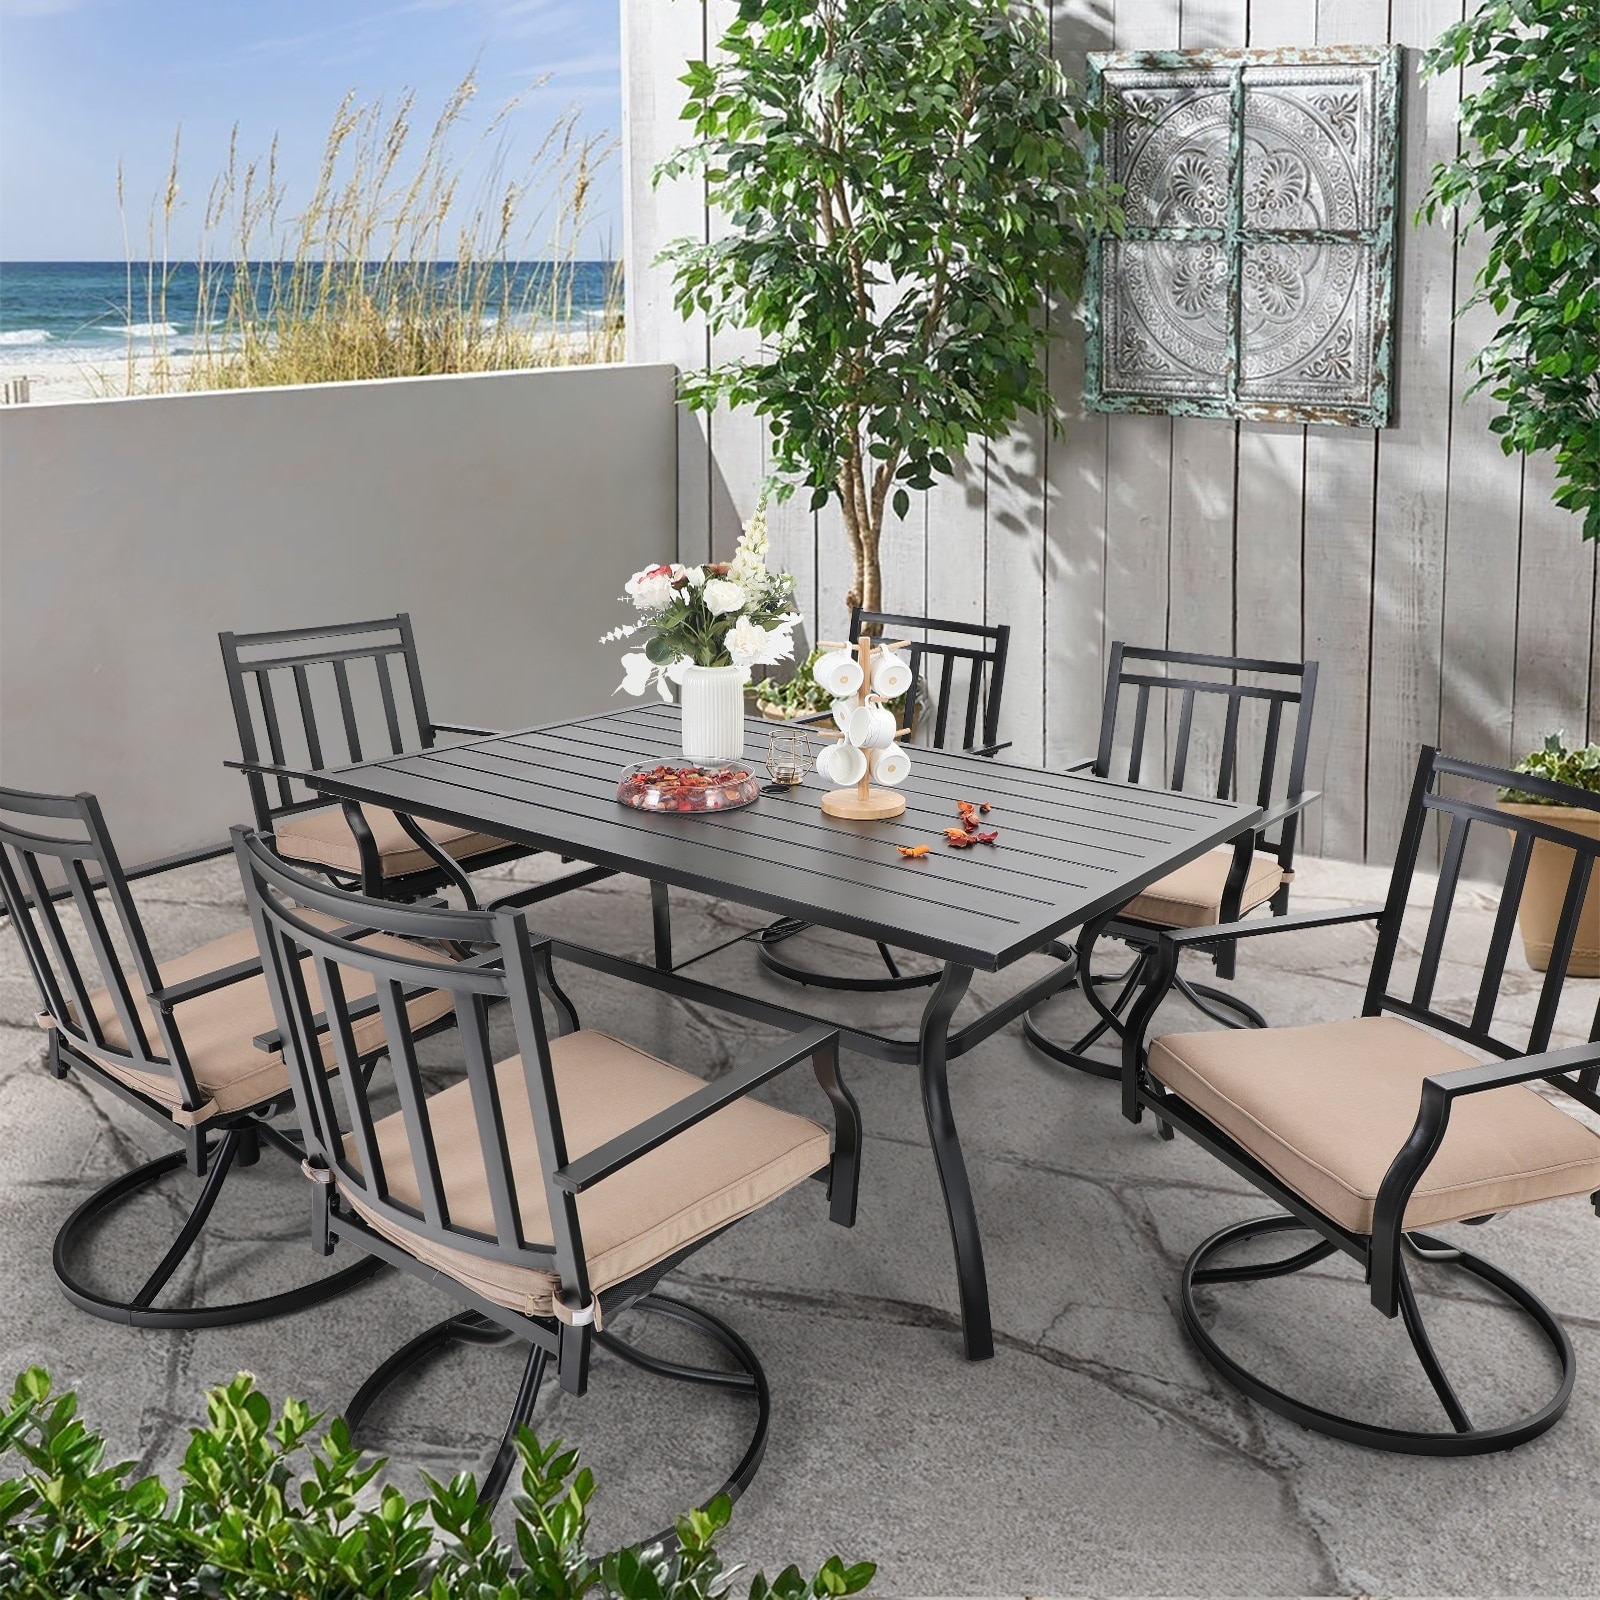 After Christmas Outdoor Furniture Sales 2021 – Save $200